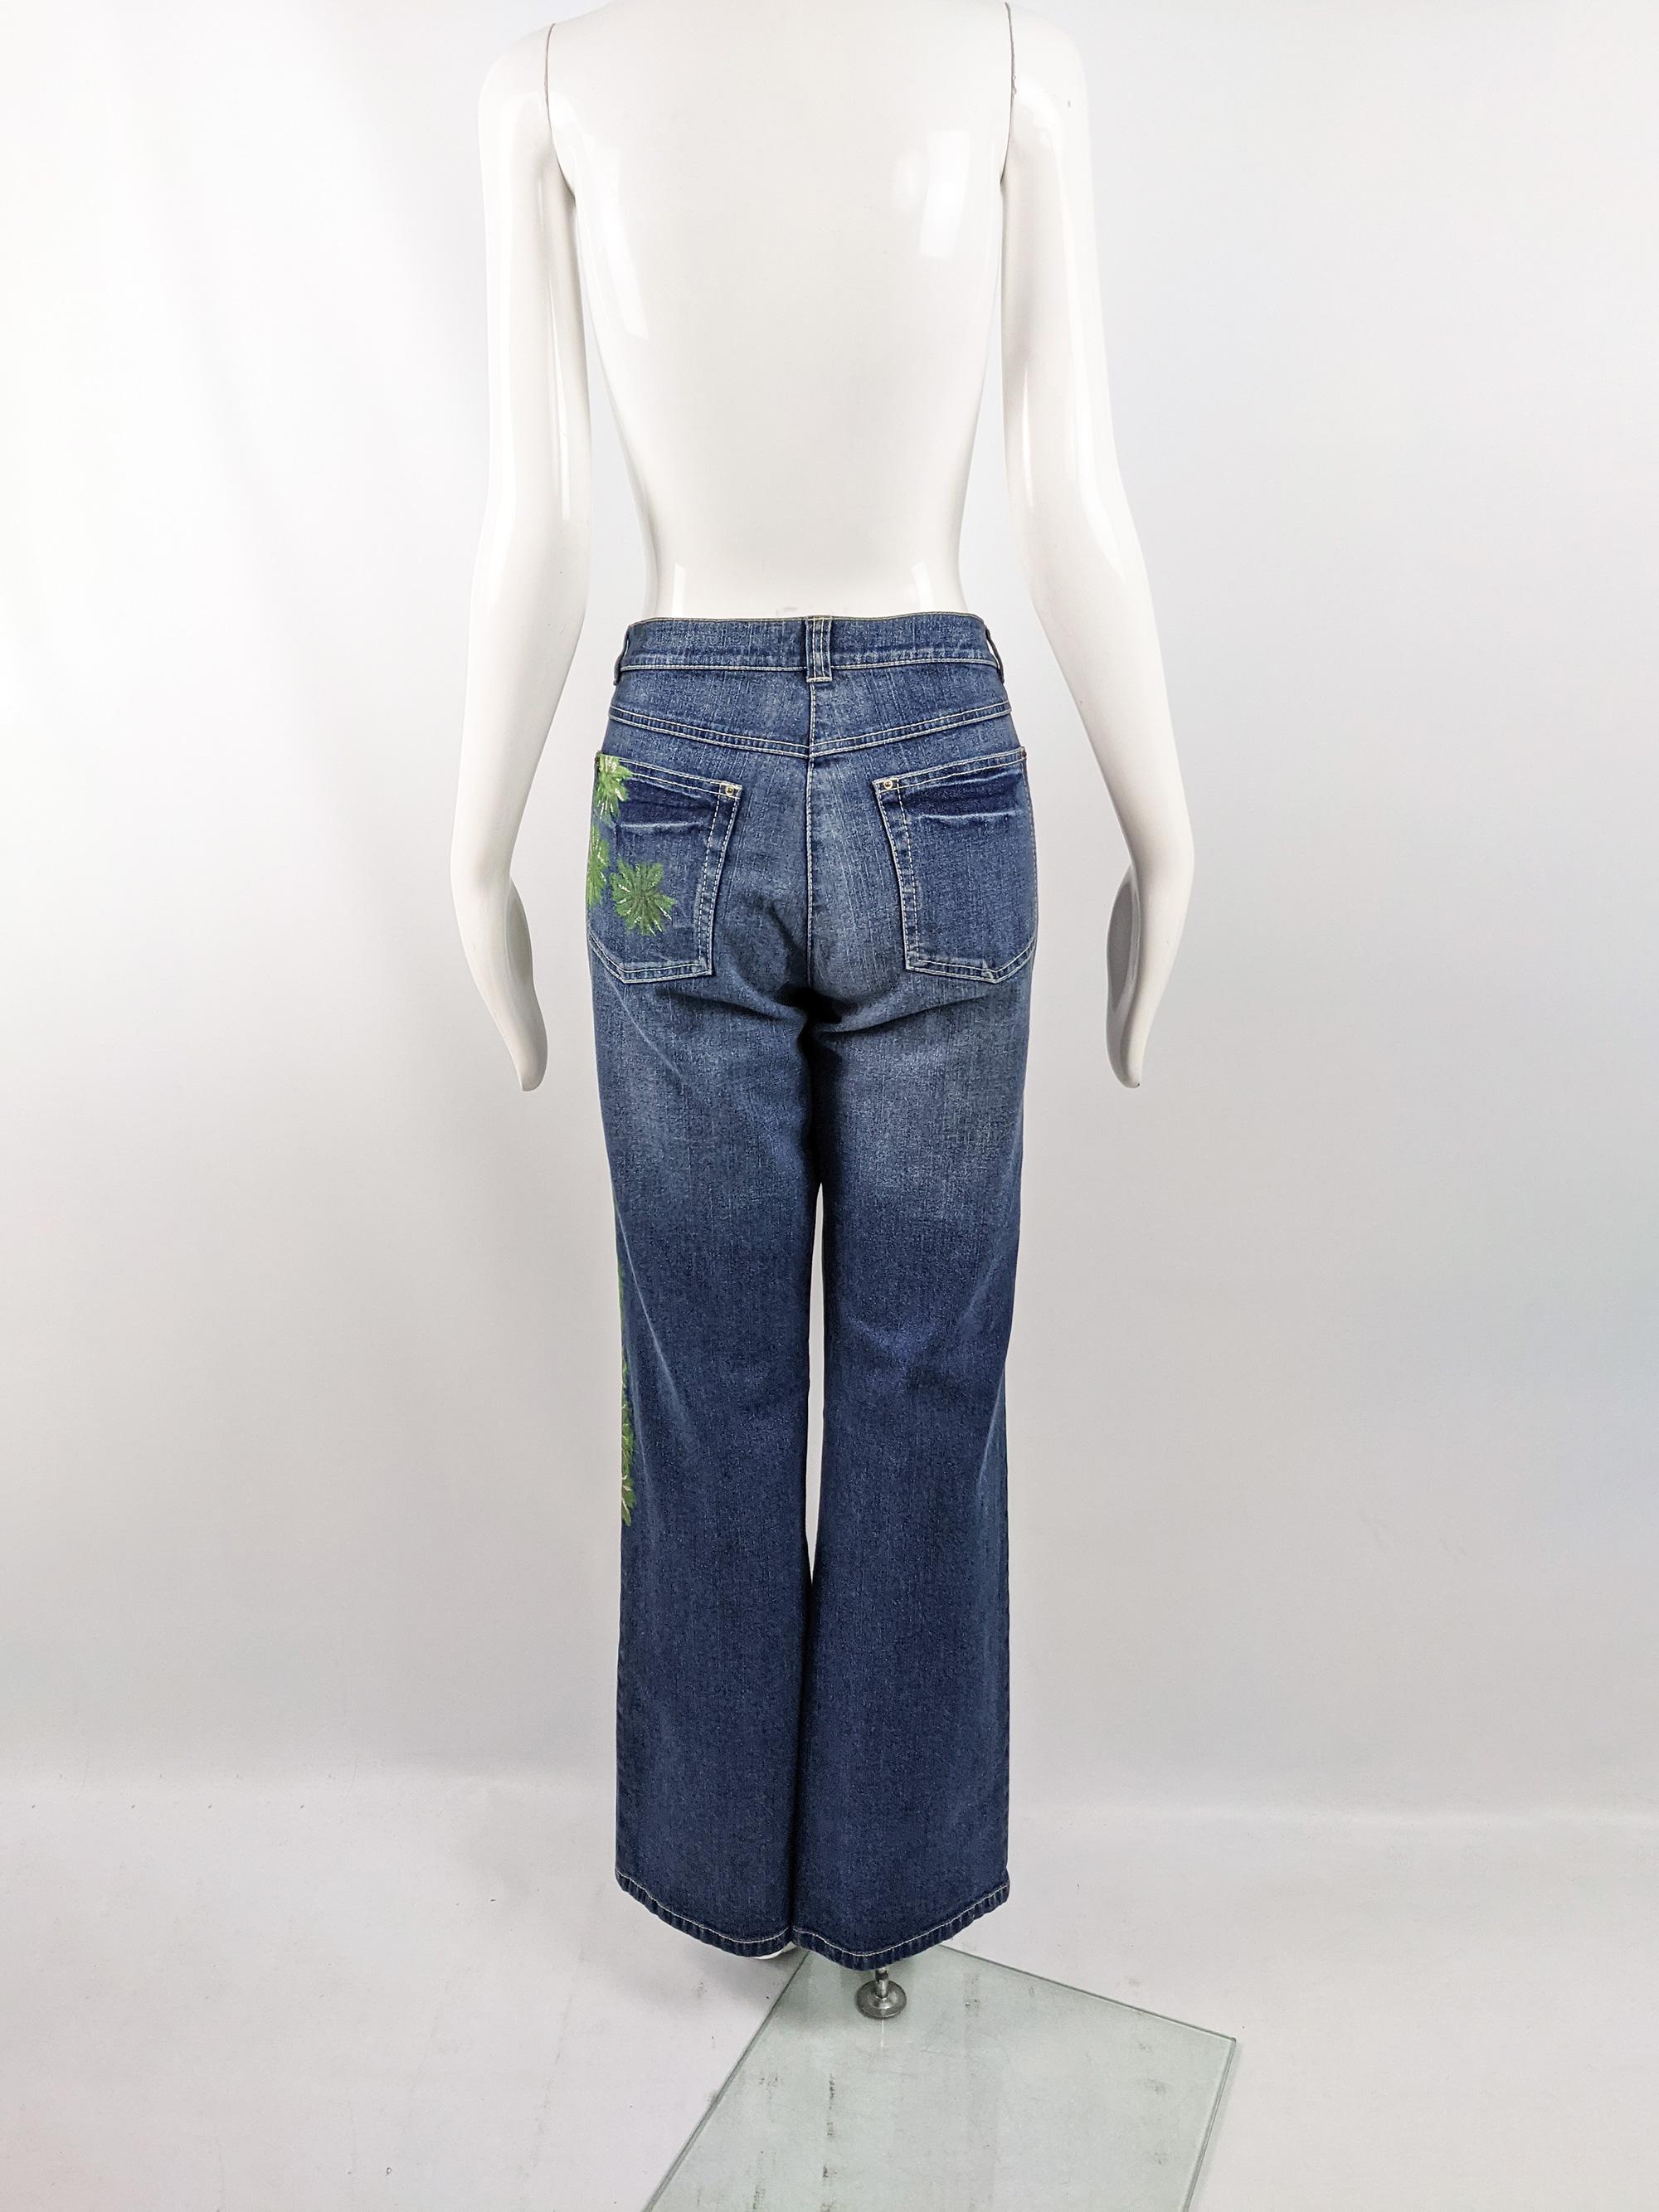 Apriori by Escada Vintage 2000s Bootcut Jeans Y2K Beaded Denim Pants In Excellent Condition For Sale In Doncaster, South Yorkshire